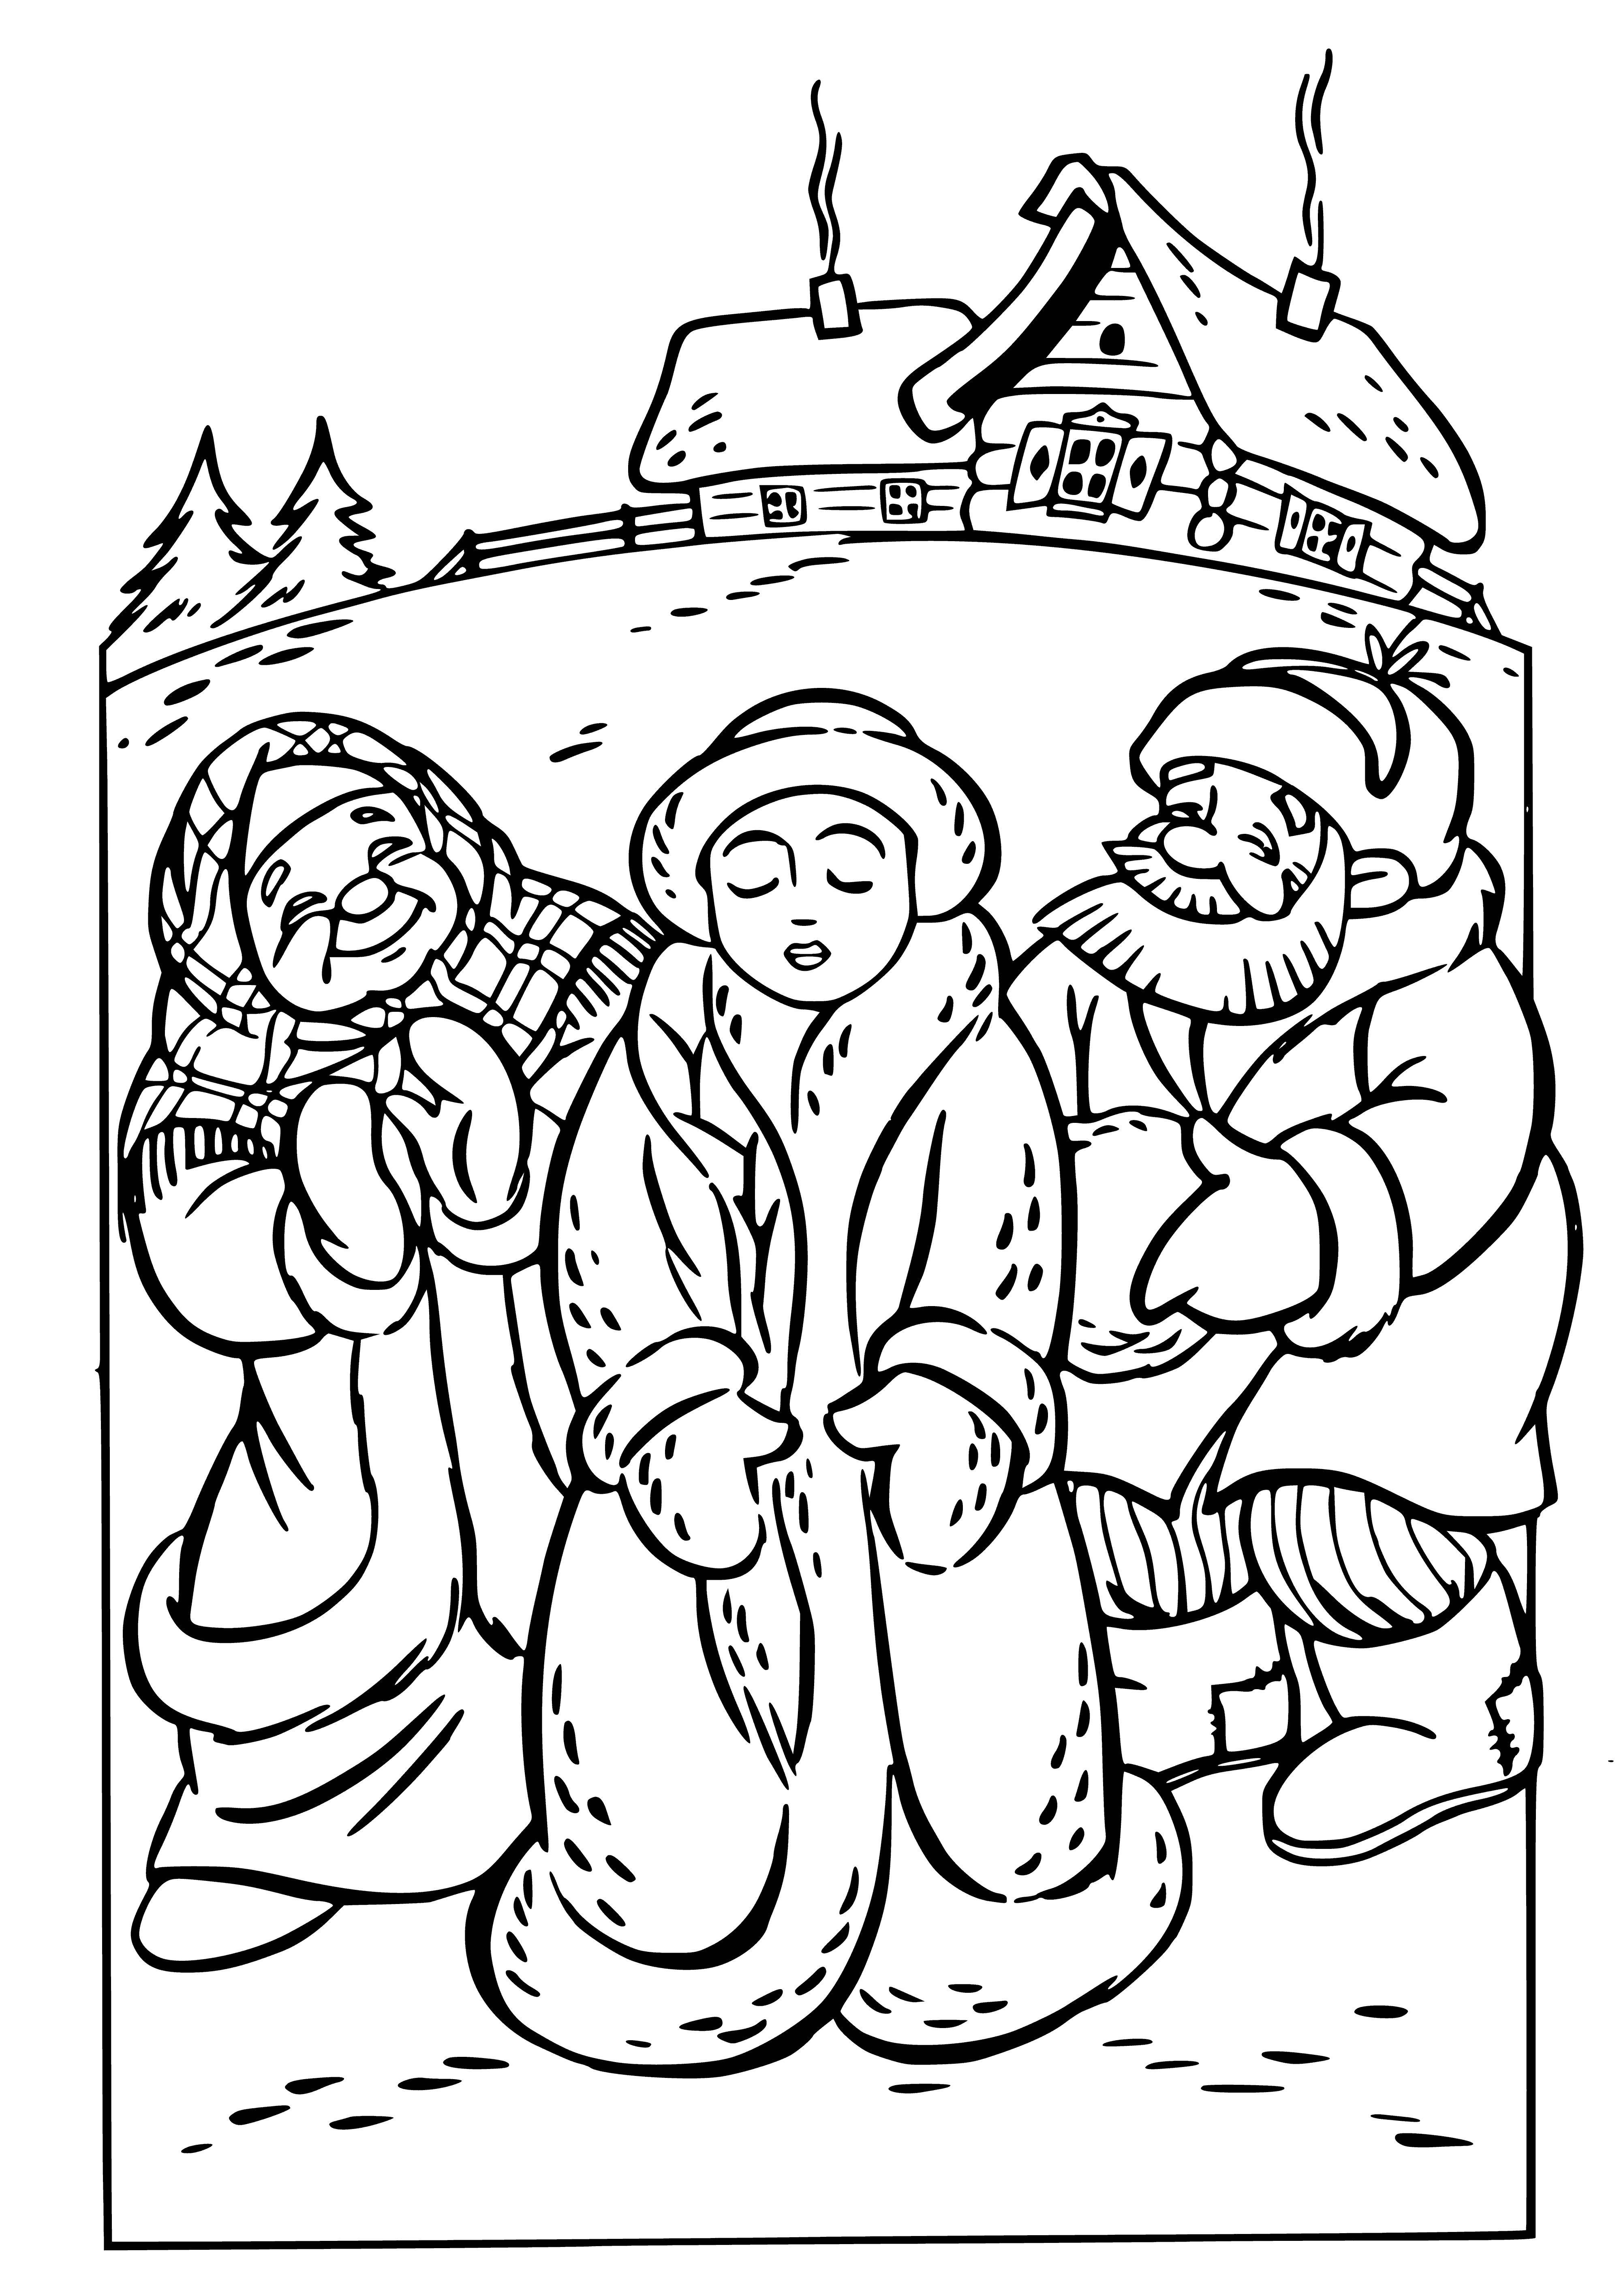 coloring page: Snow maiden stands in field, wearing white dress, scarf. Pale face, blue eyes, small nose, red lips, blond curls. Holding staff in left hand.